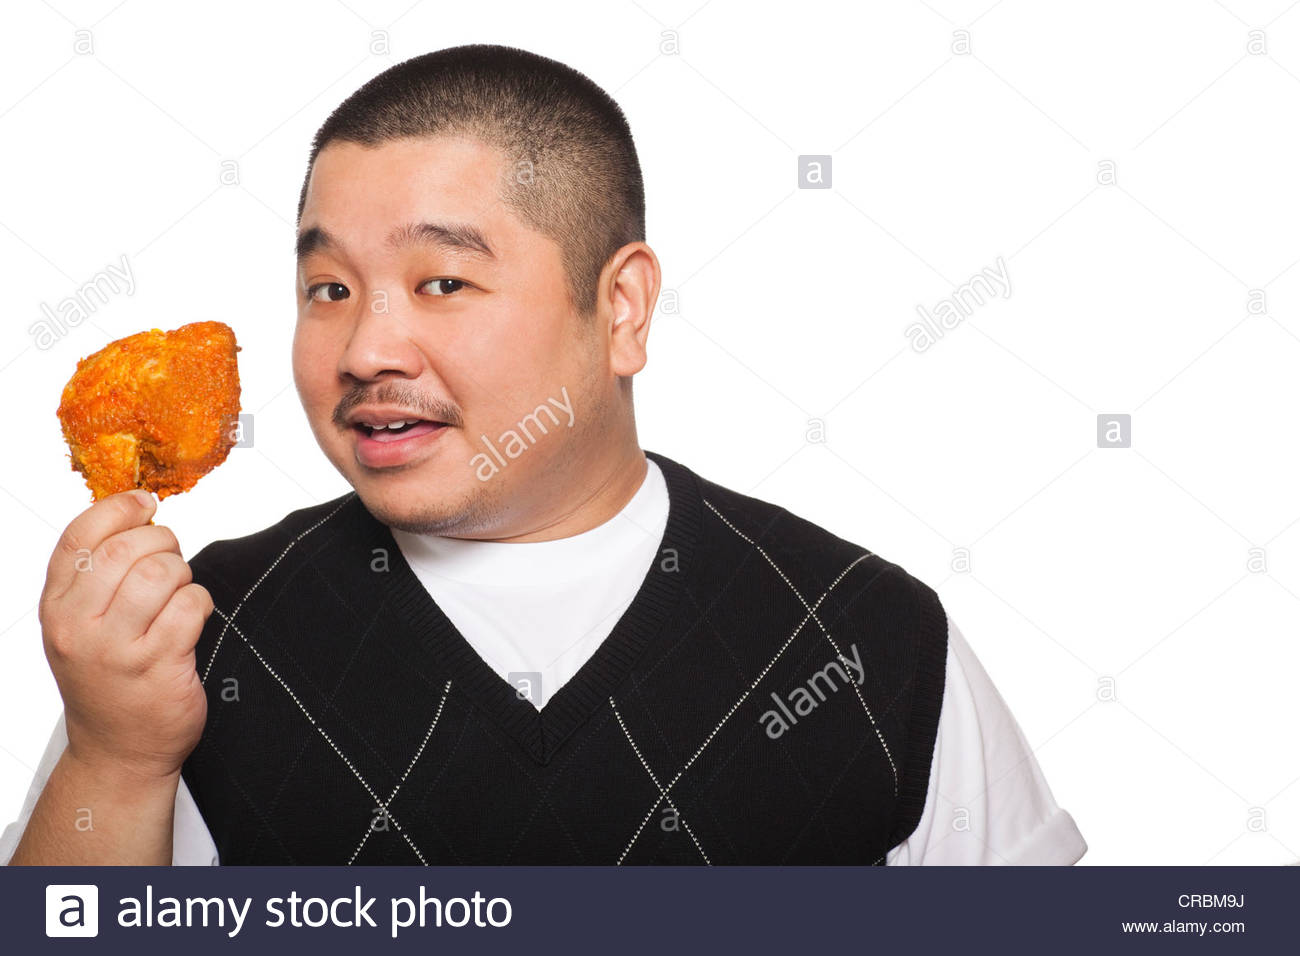 portrait-of-a-hungry-man-holding-fried-c